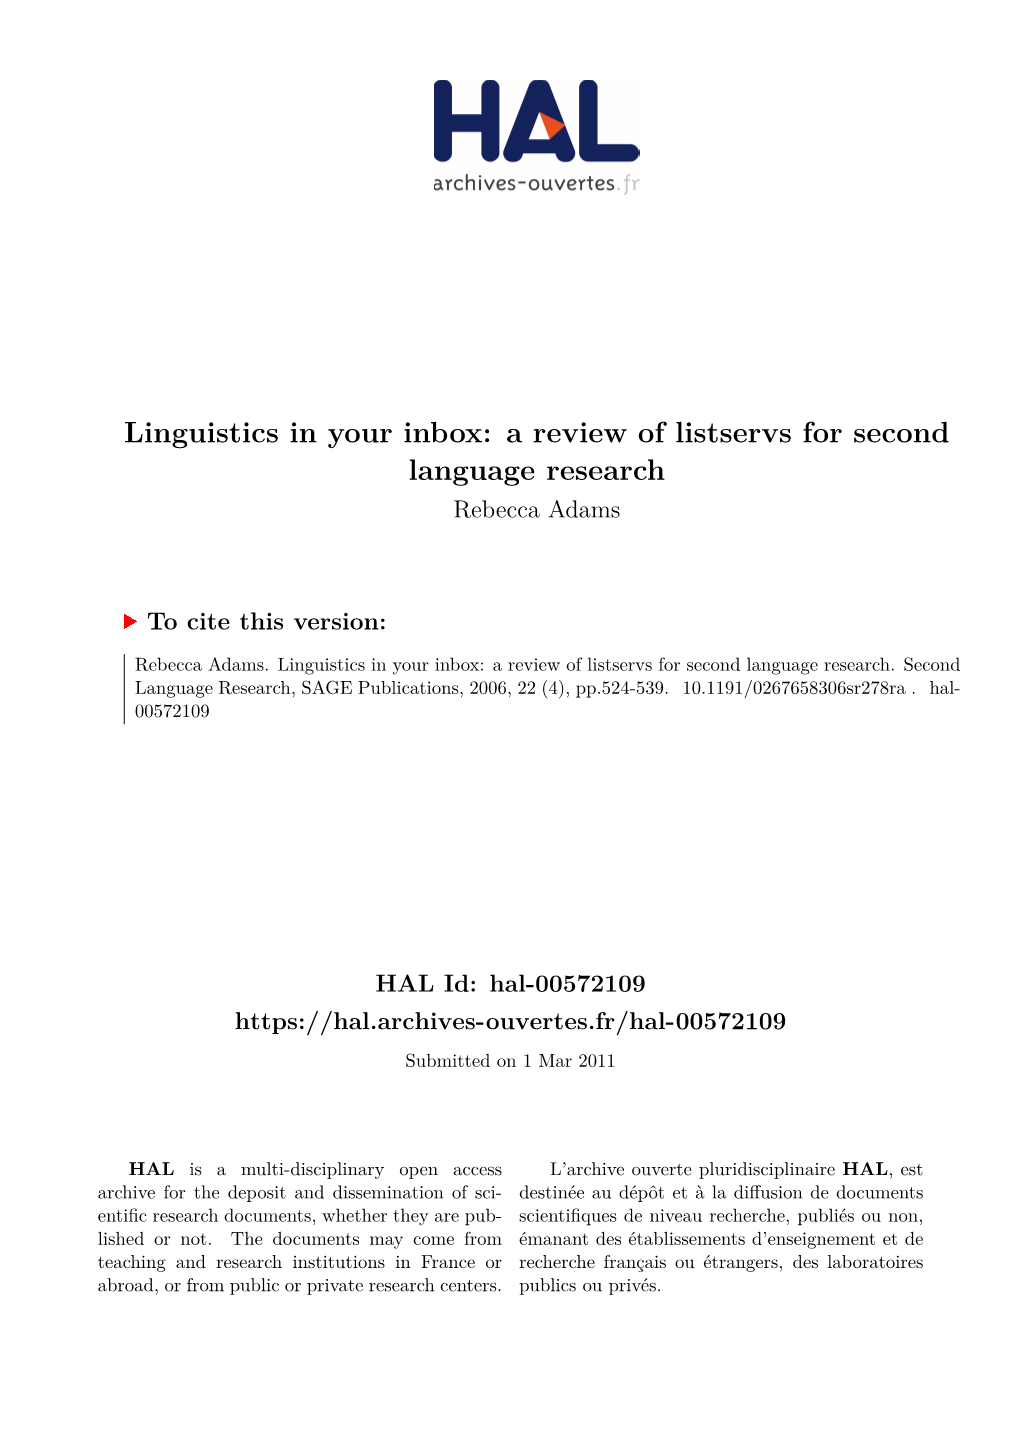 Linguistics in Your Inbox: a Review of Listservs for Second Language Research Rebecca Adams